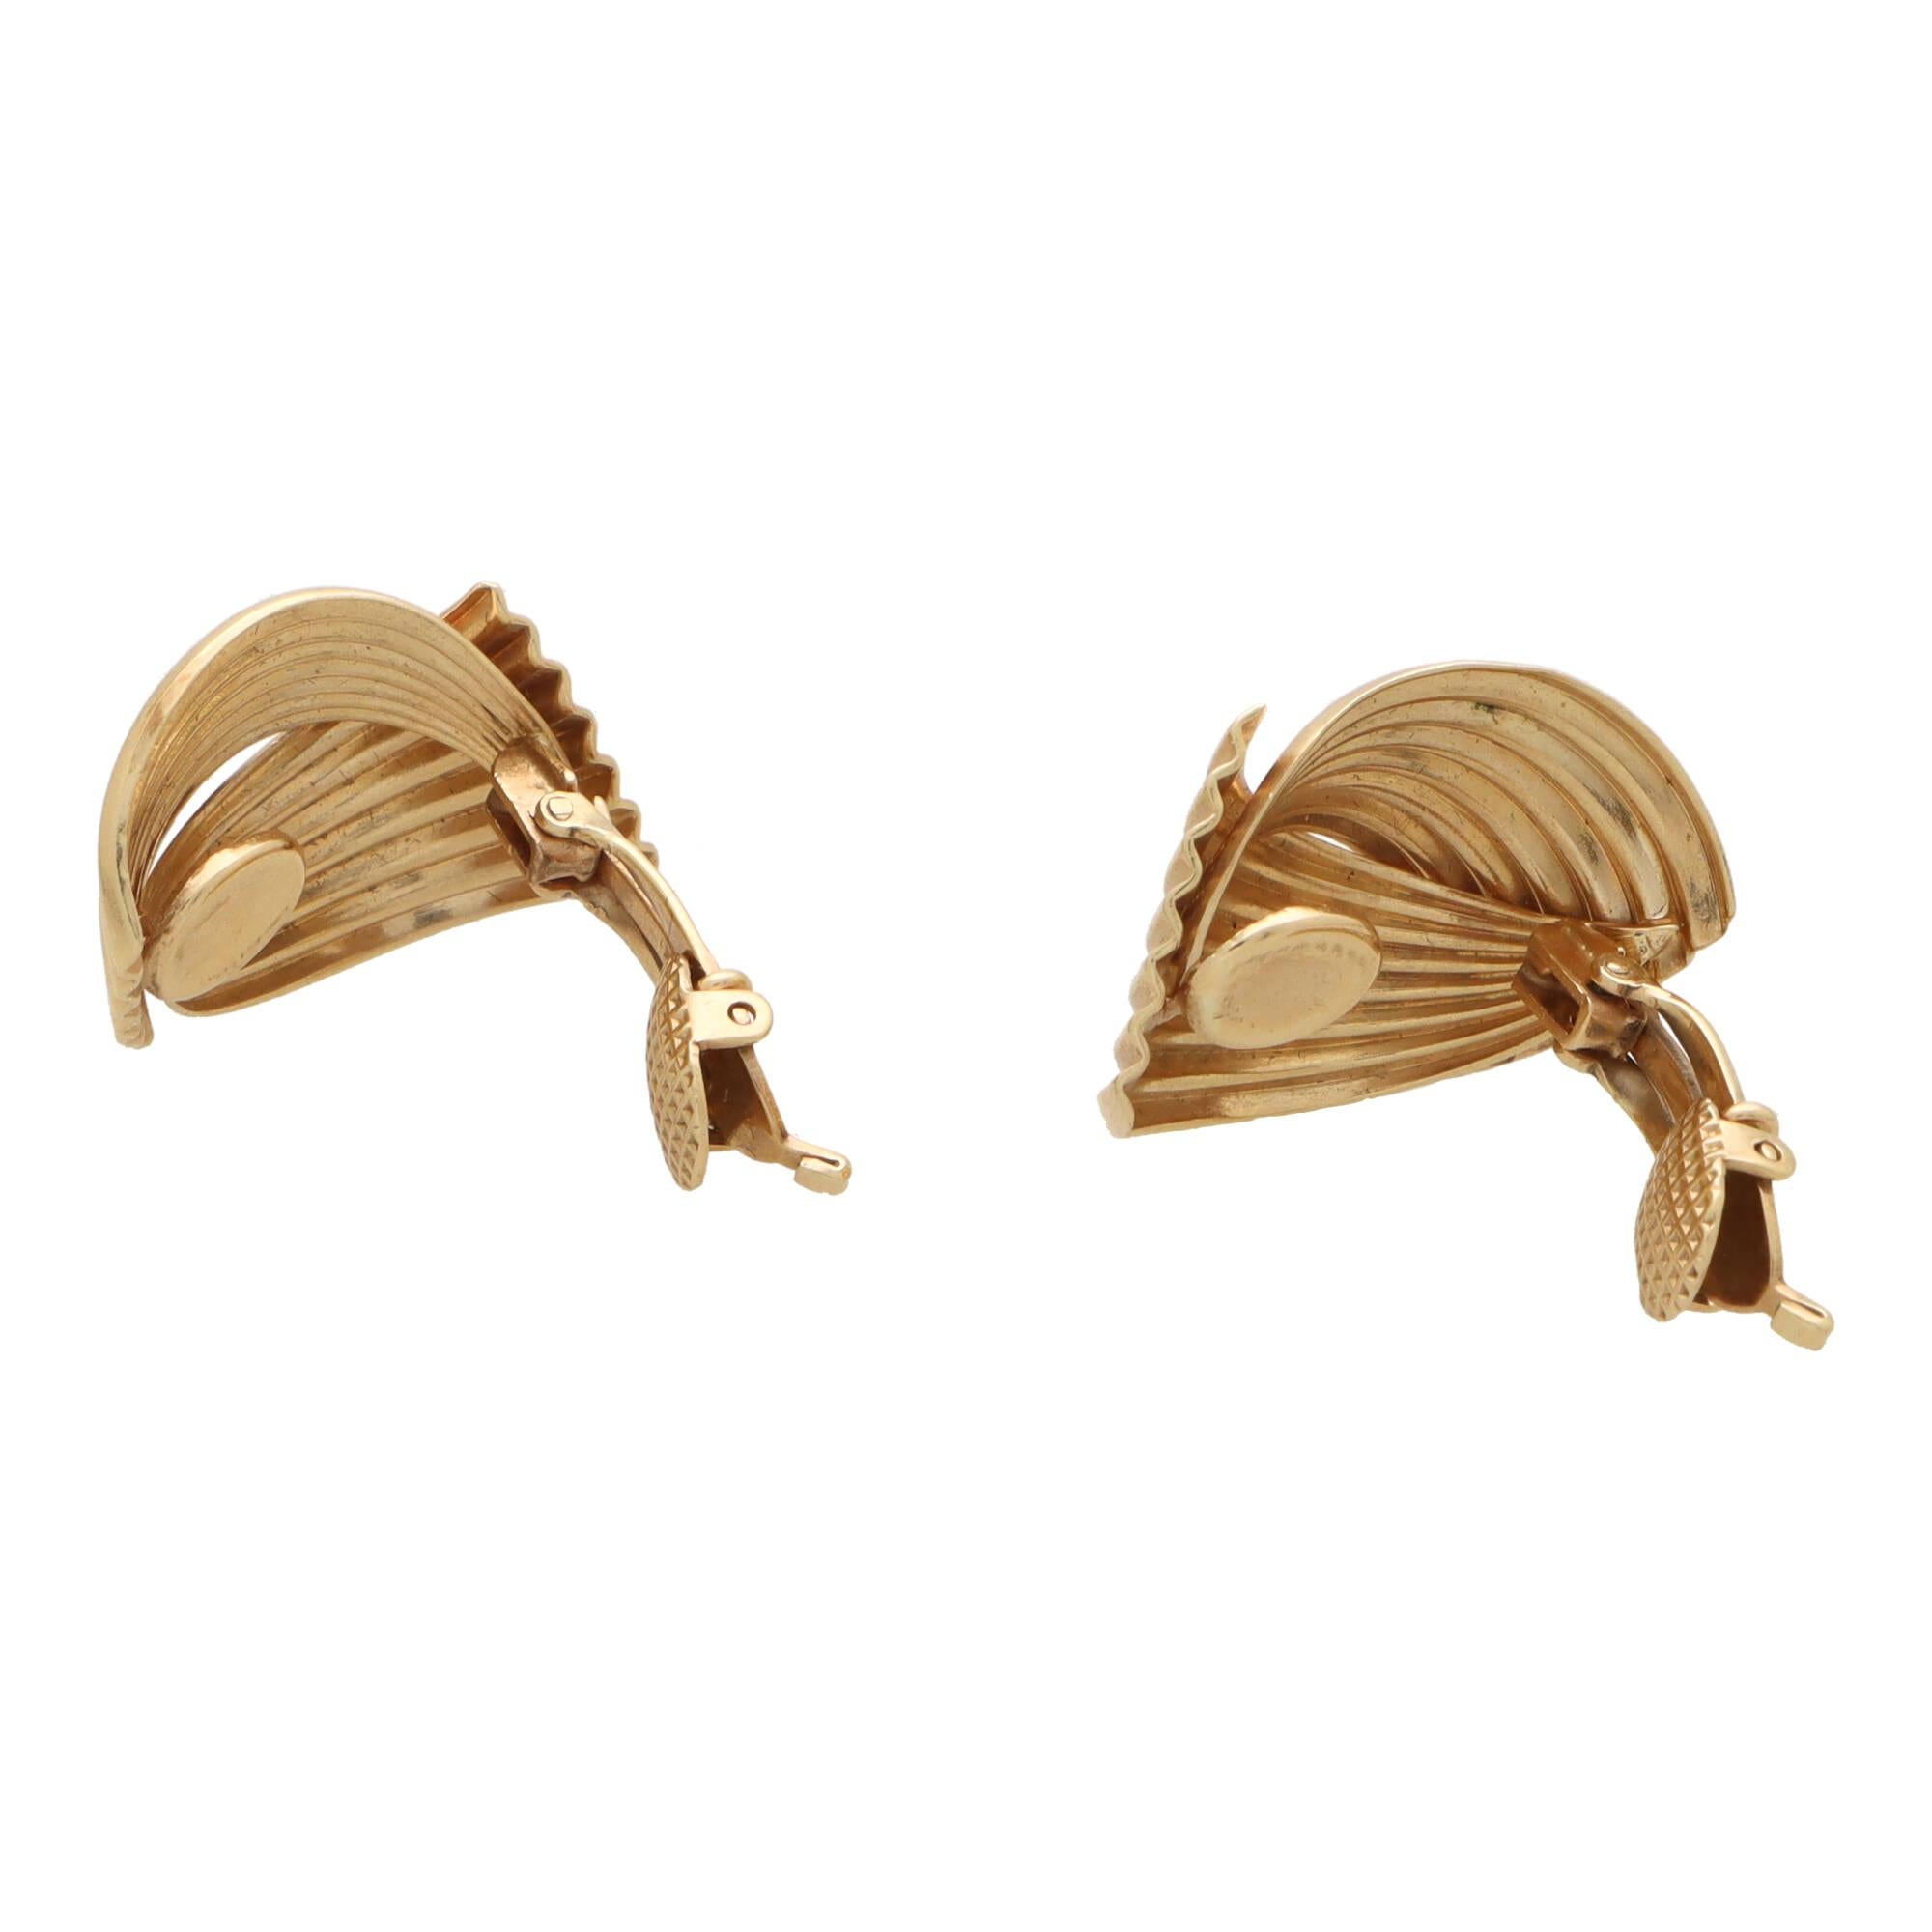 A stylish retro inspired pair of Tiffany & Co. fluted fan earrings set in 14k rose gold.

Each earring is composed of two fluted fan motifs, pieced together to create this lifted chunky appearance on the ear. The earrings echo the retro era